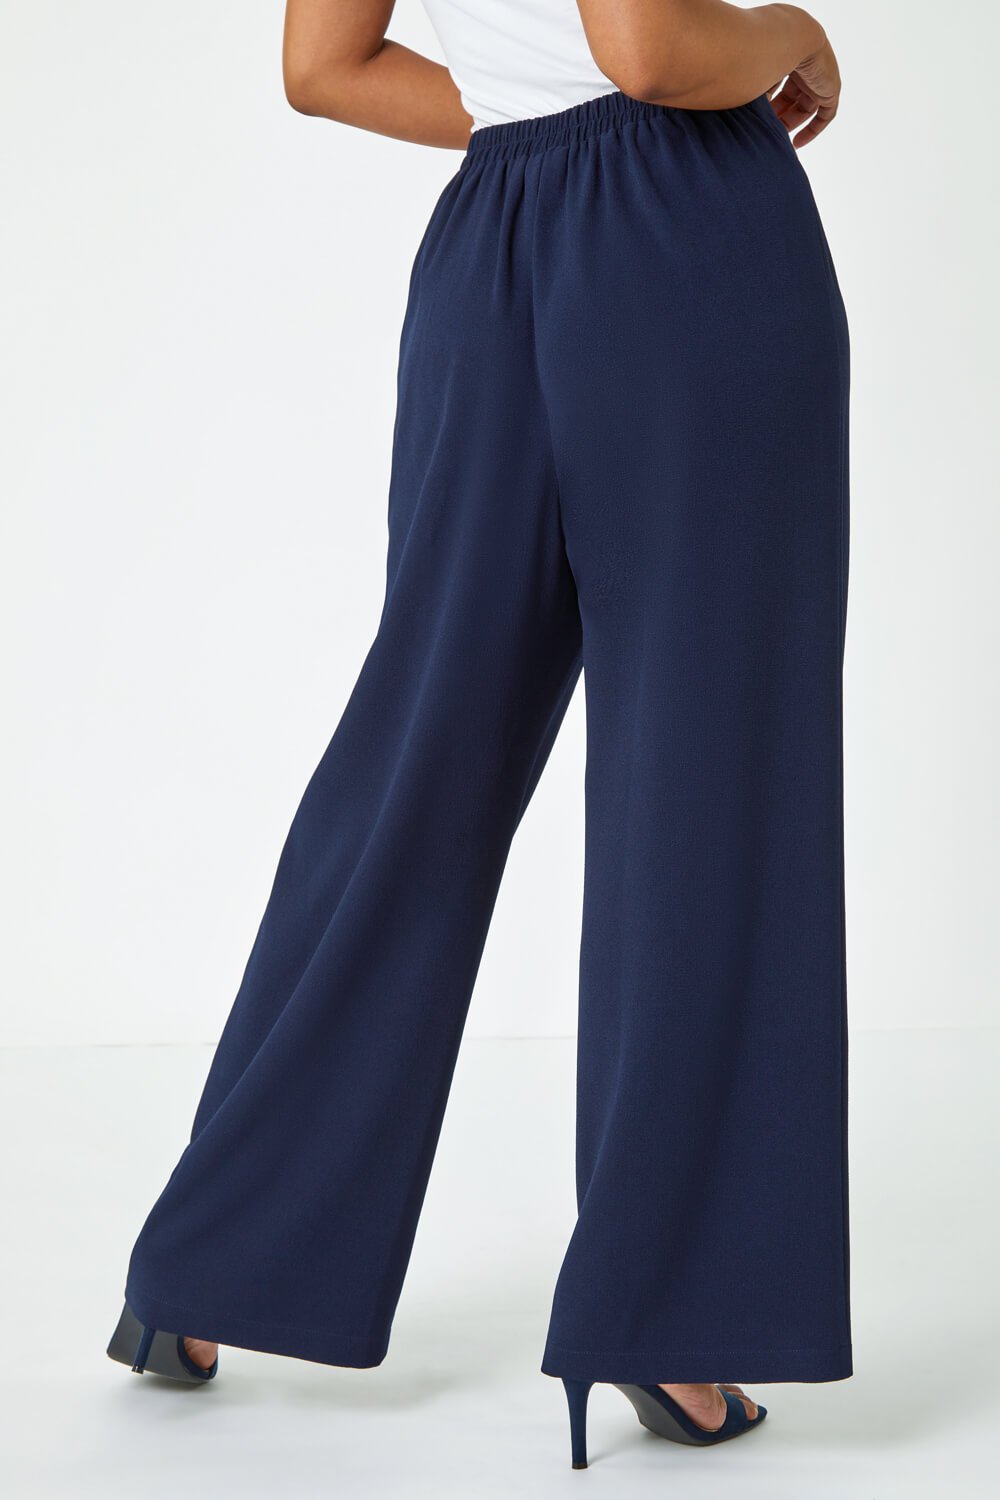 Navy  Petite Wide Leg Stretch Trousers, Image 3 of 6